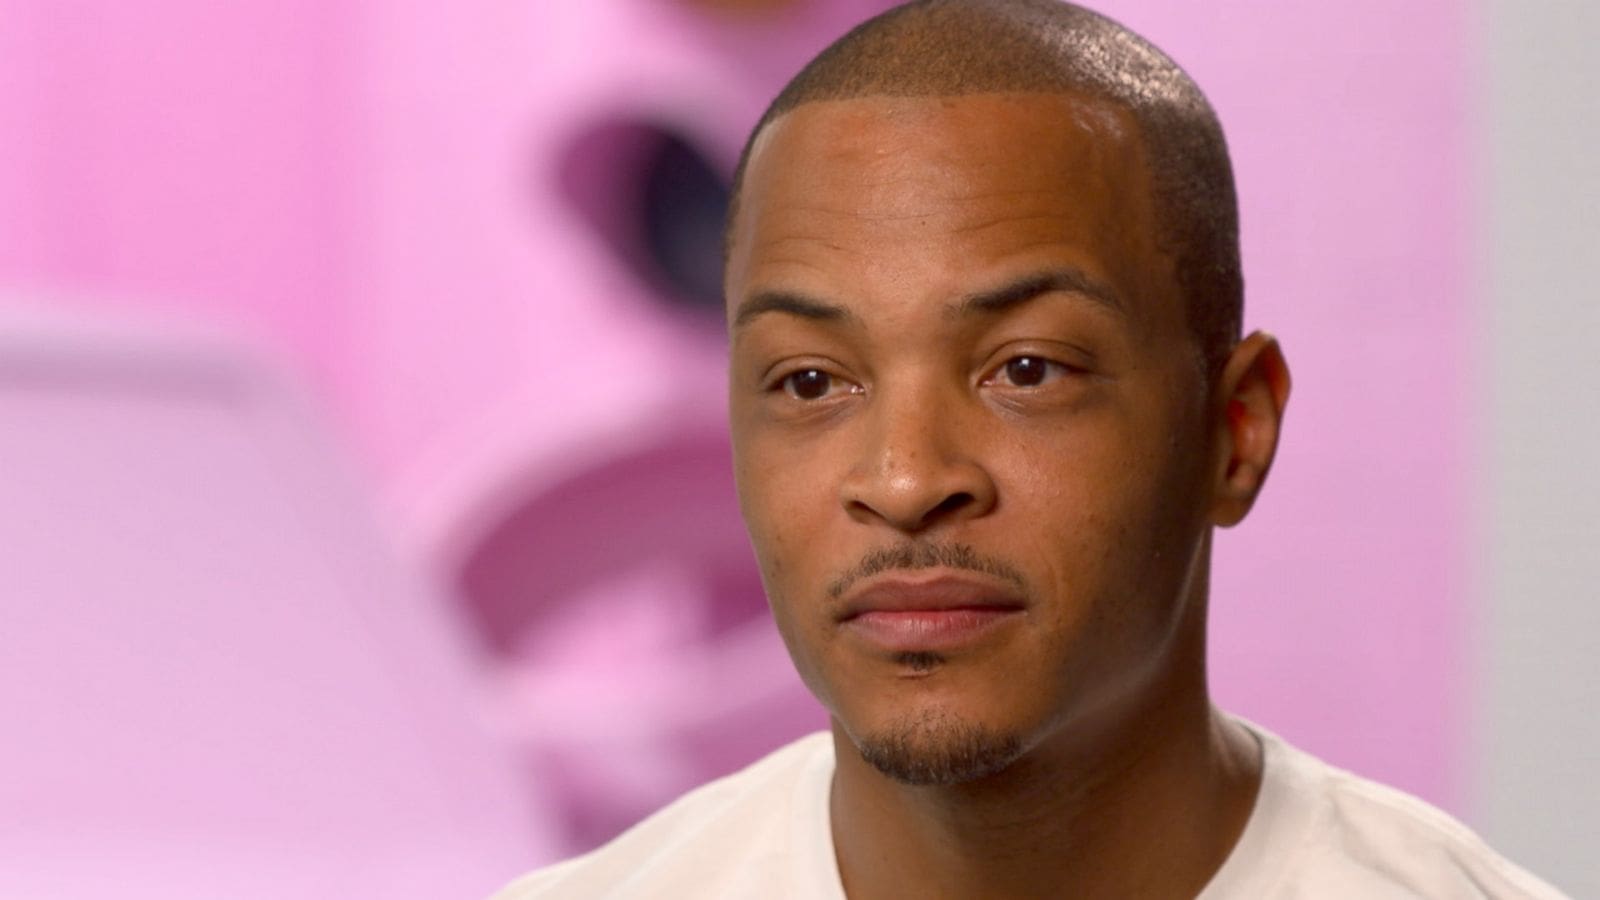 T.I.'s Message For Black Men Has Some Fans Upset And Offended